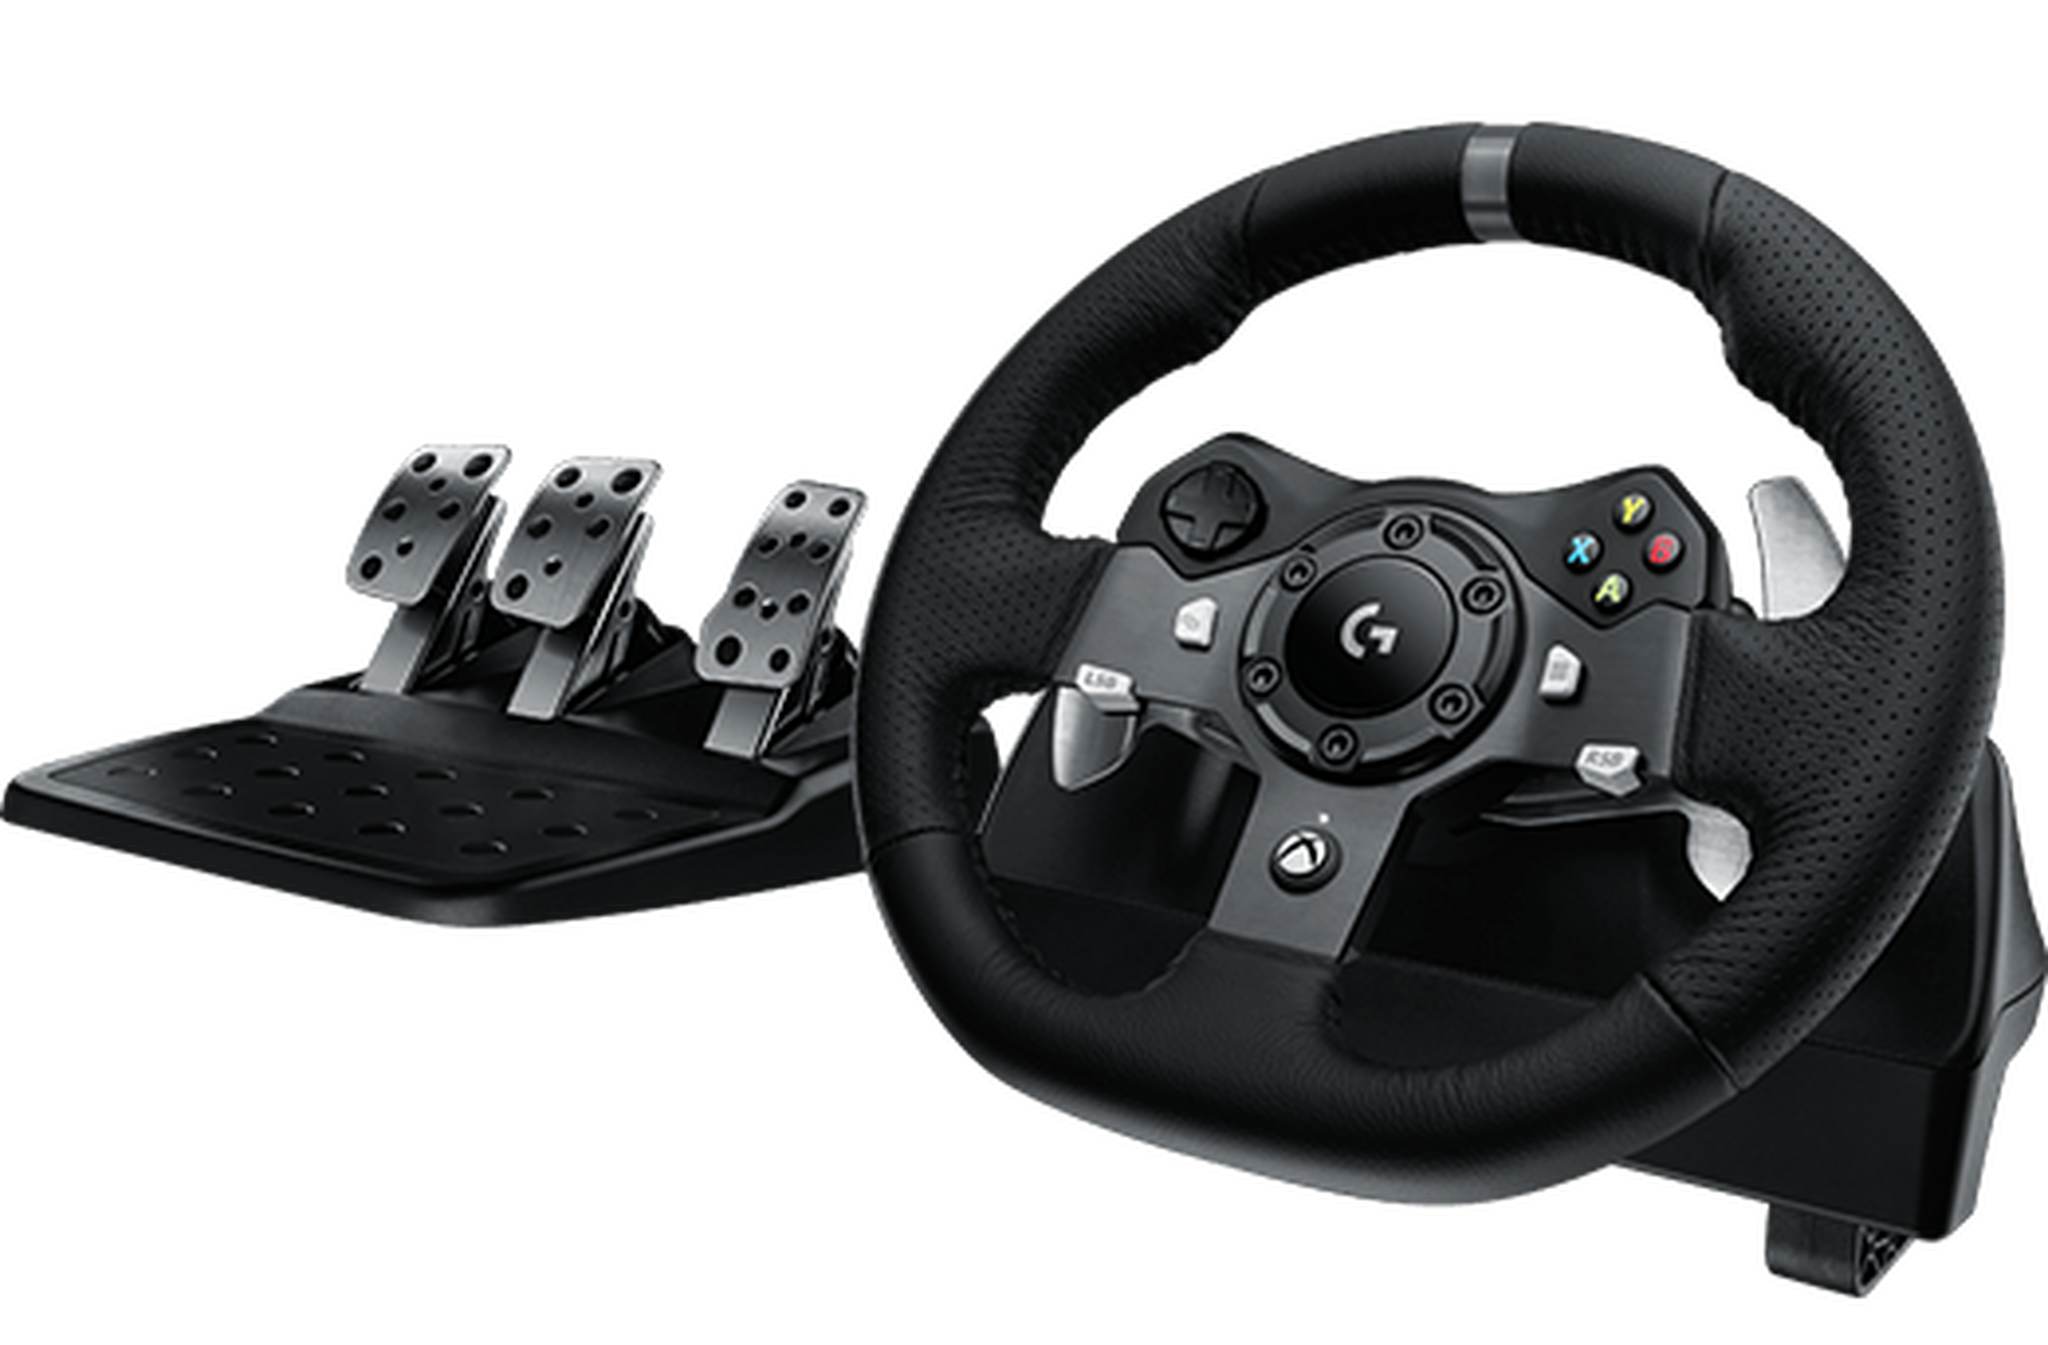 Logitech Driving Force Steering Wheel and Pedals for Xbox One and PC (941-000124) - Black